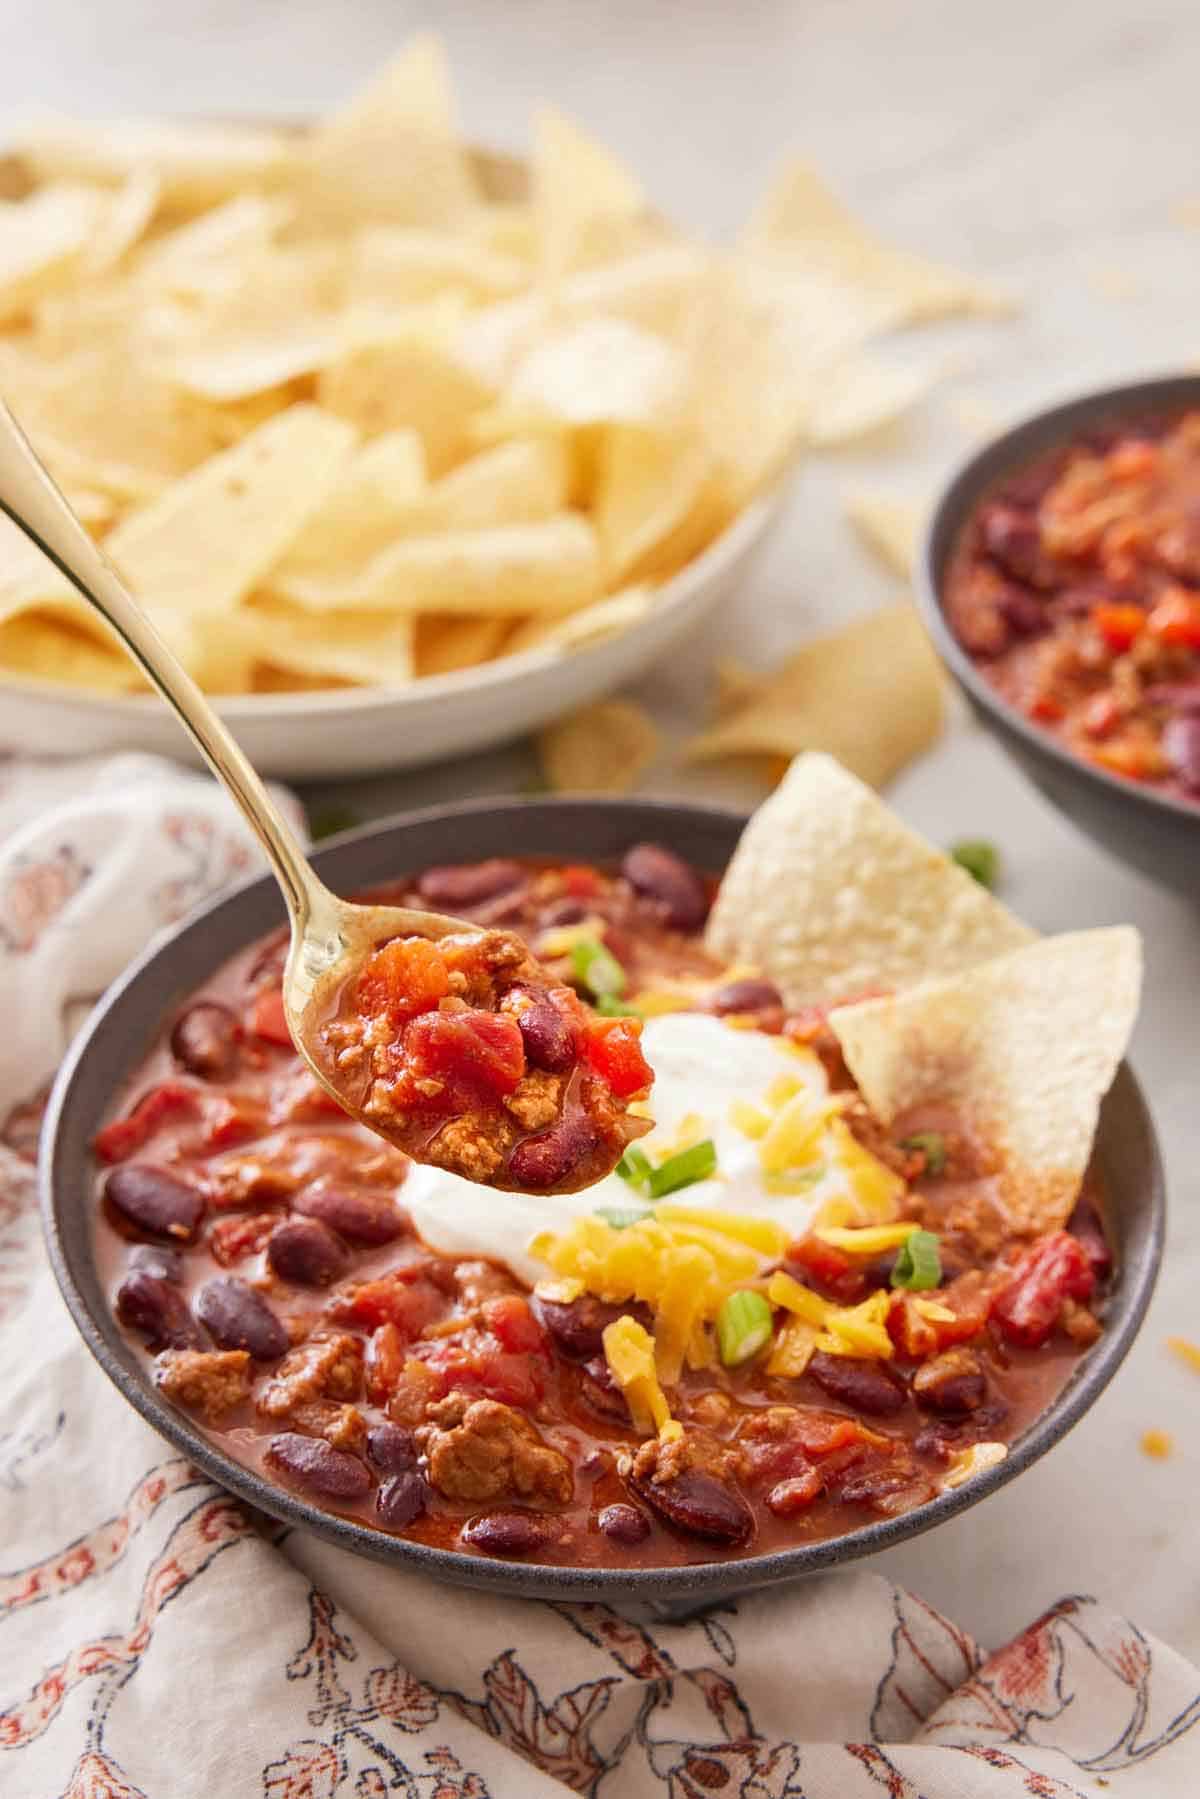 A spoonful of turkey chili lifted from a bowl. A plate of chips in the background.